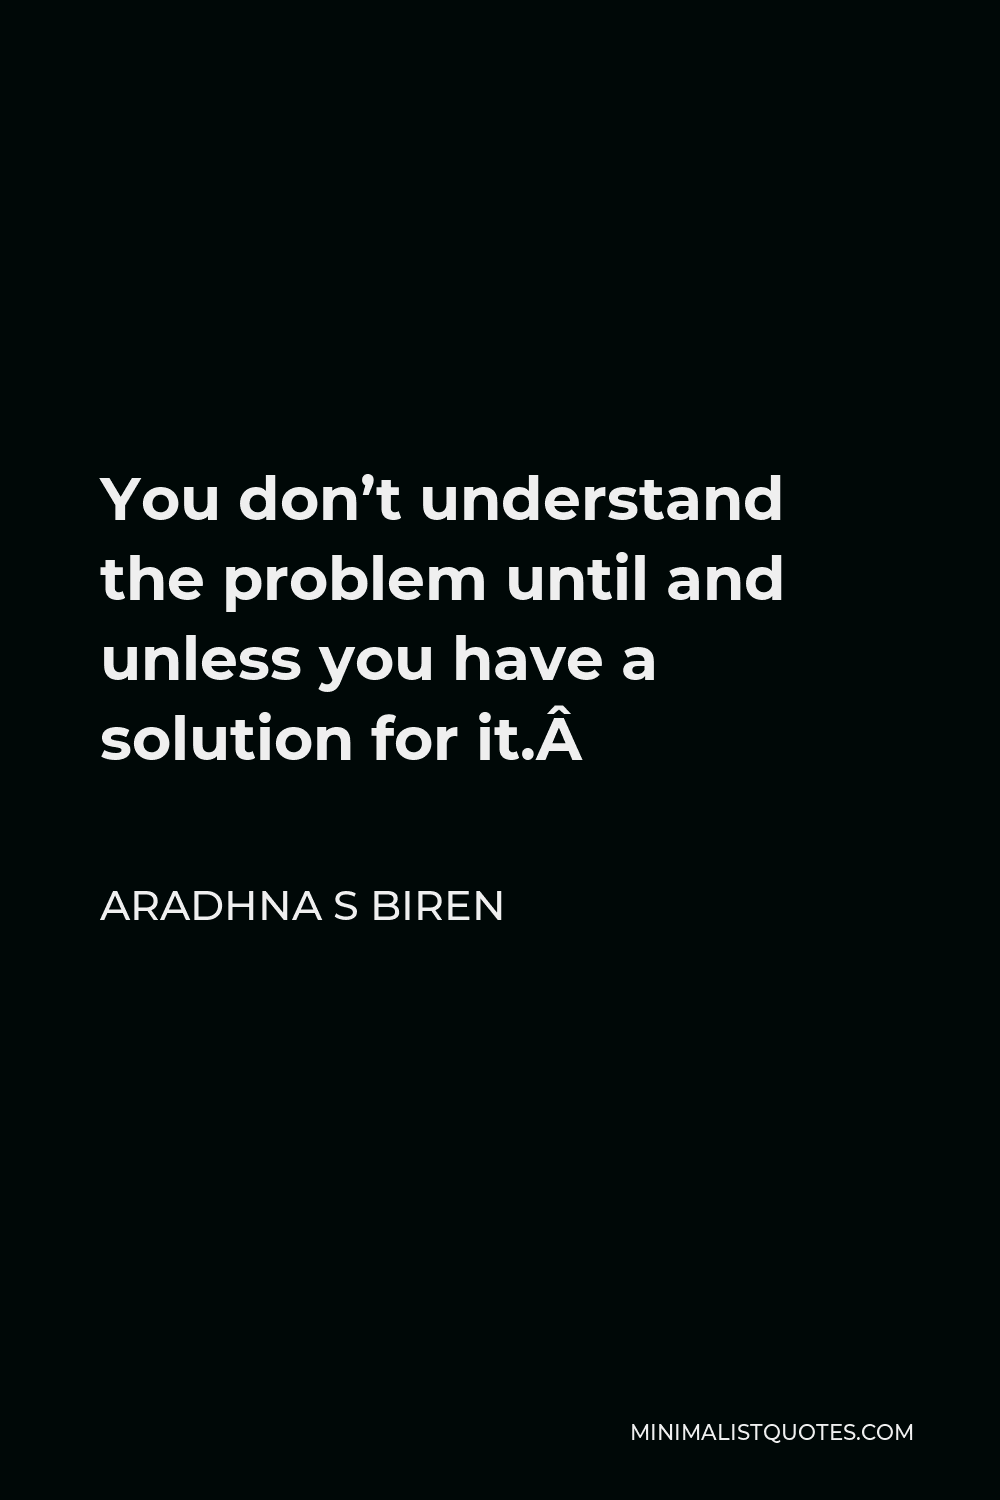 Aradhna S Biren Quote You Don T Understand The Problem Until And Unless You Have A Solution For It